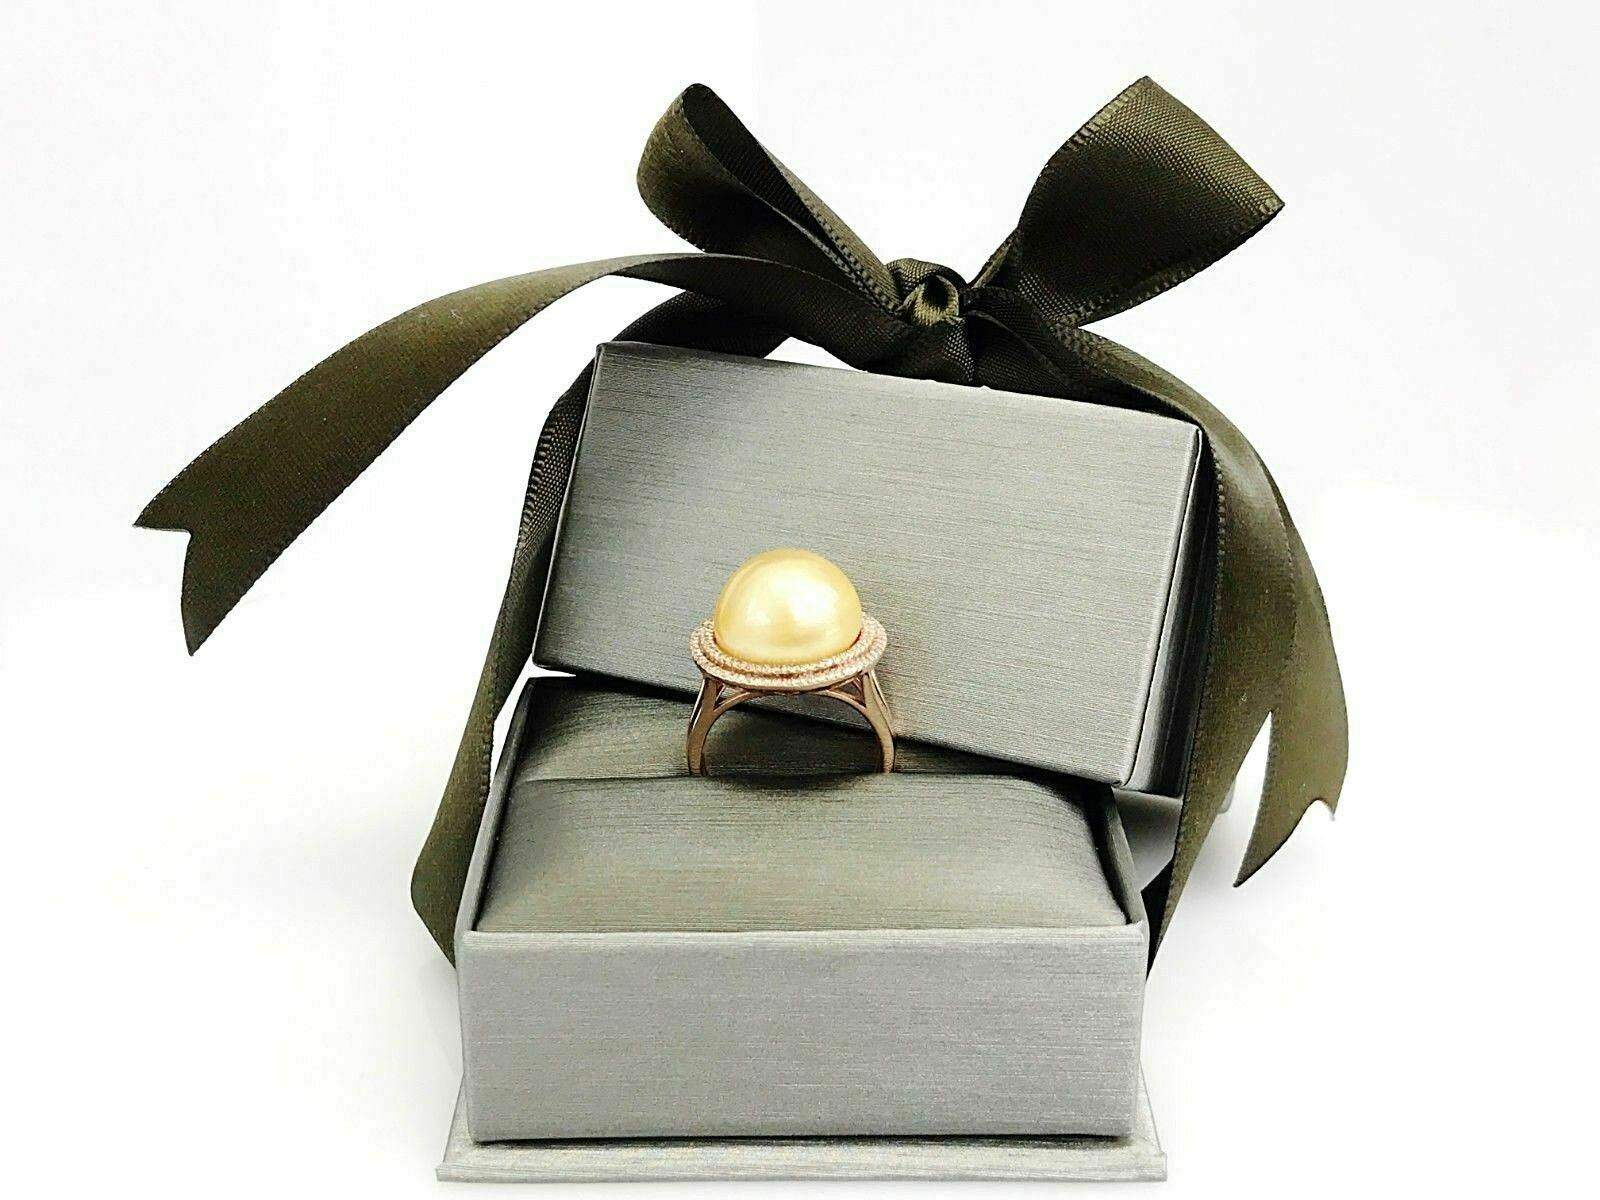 15.65 ct Pearl Ring with Double Halo Diamond in 14K Gold (White/Rose)